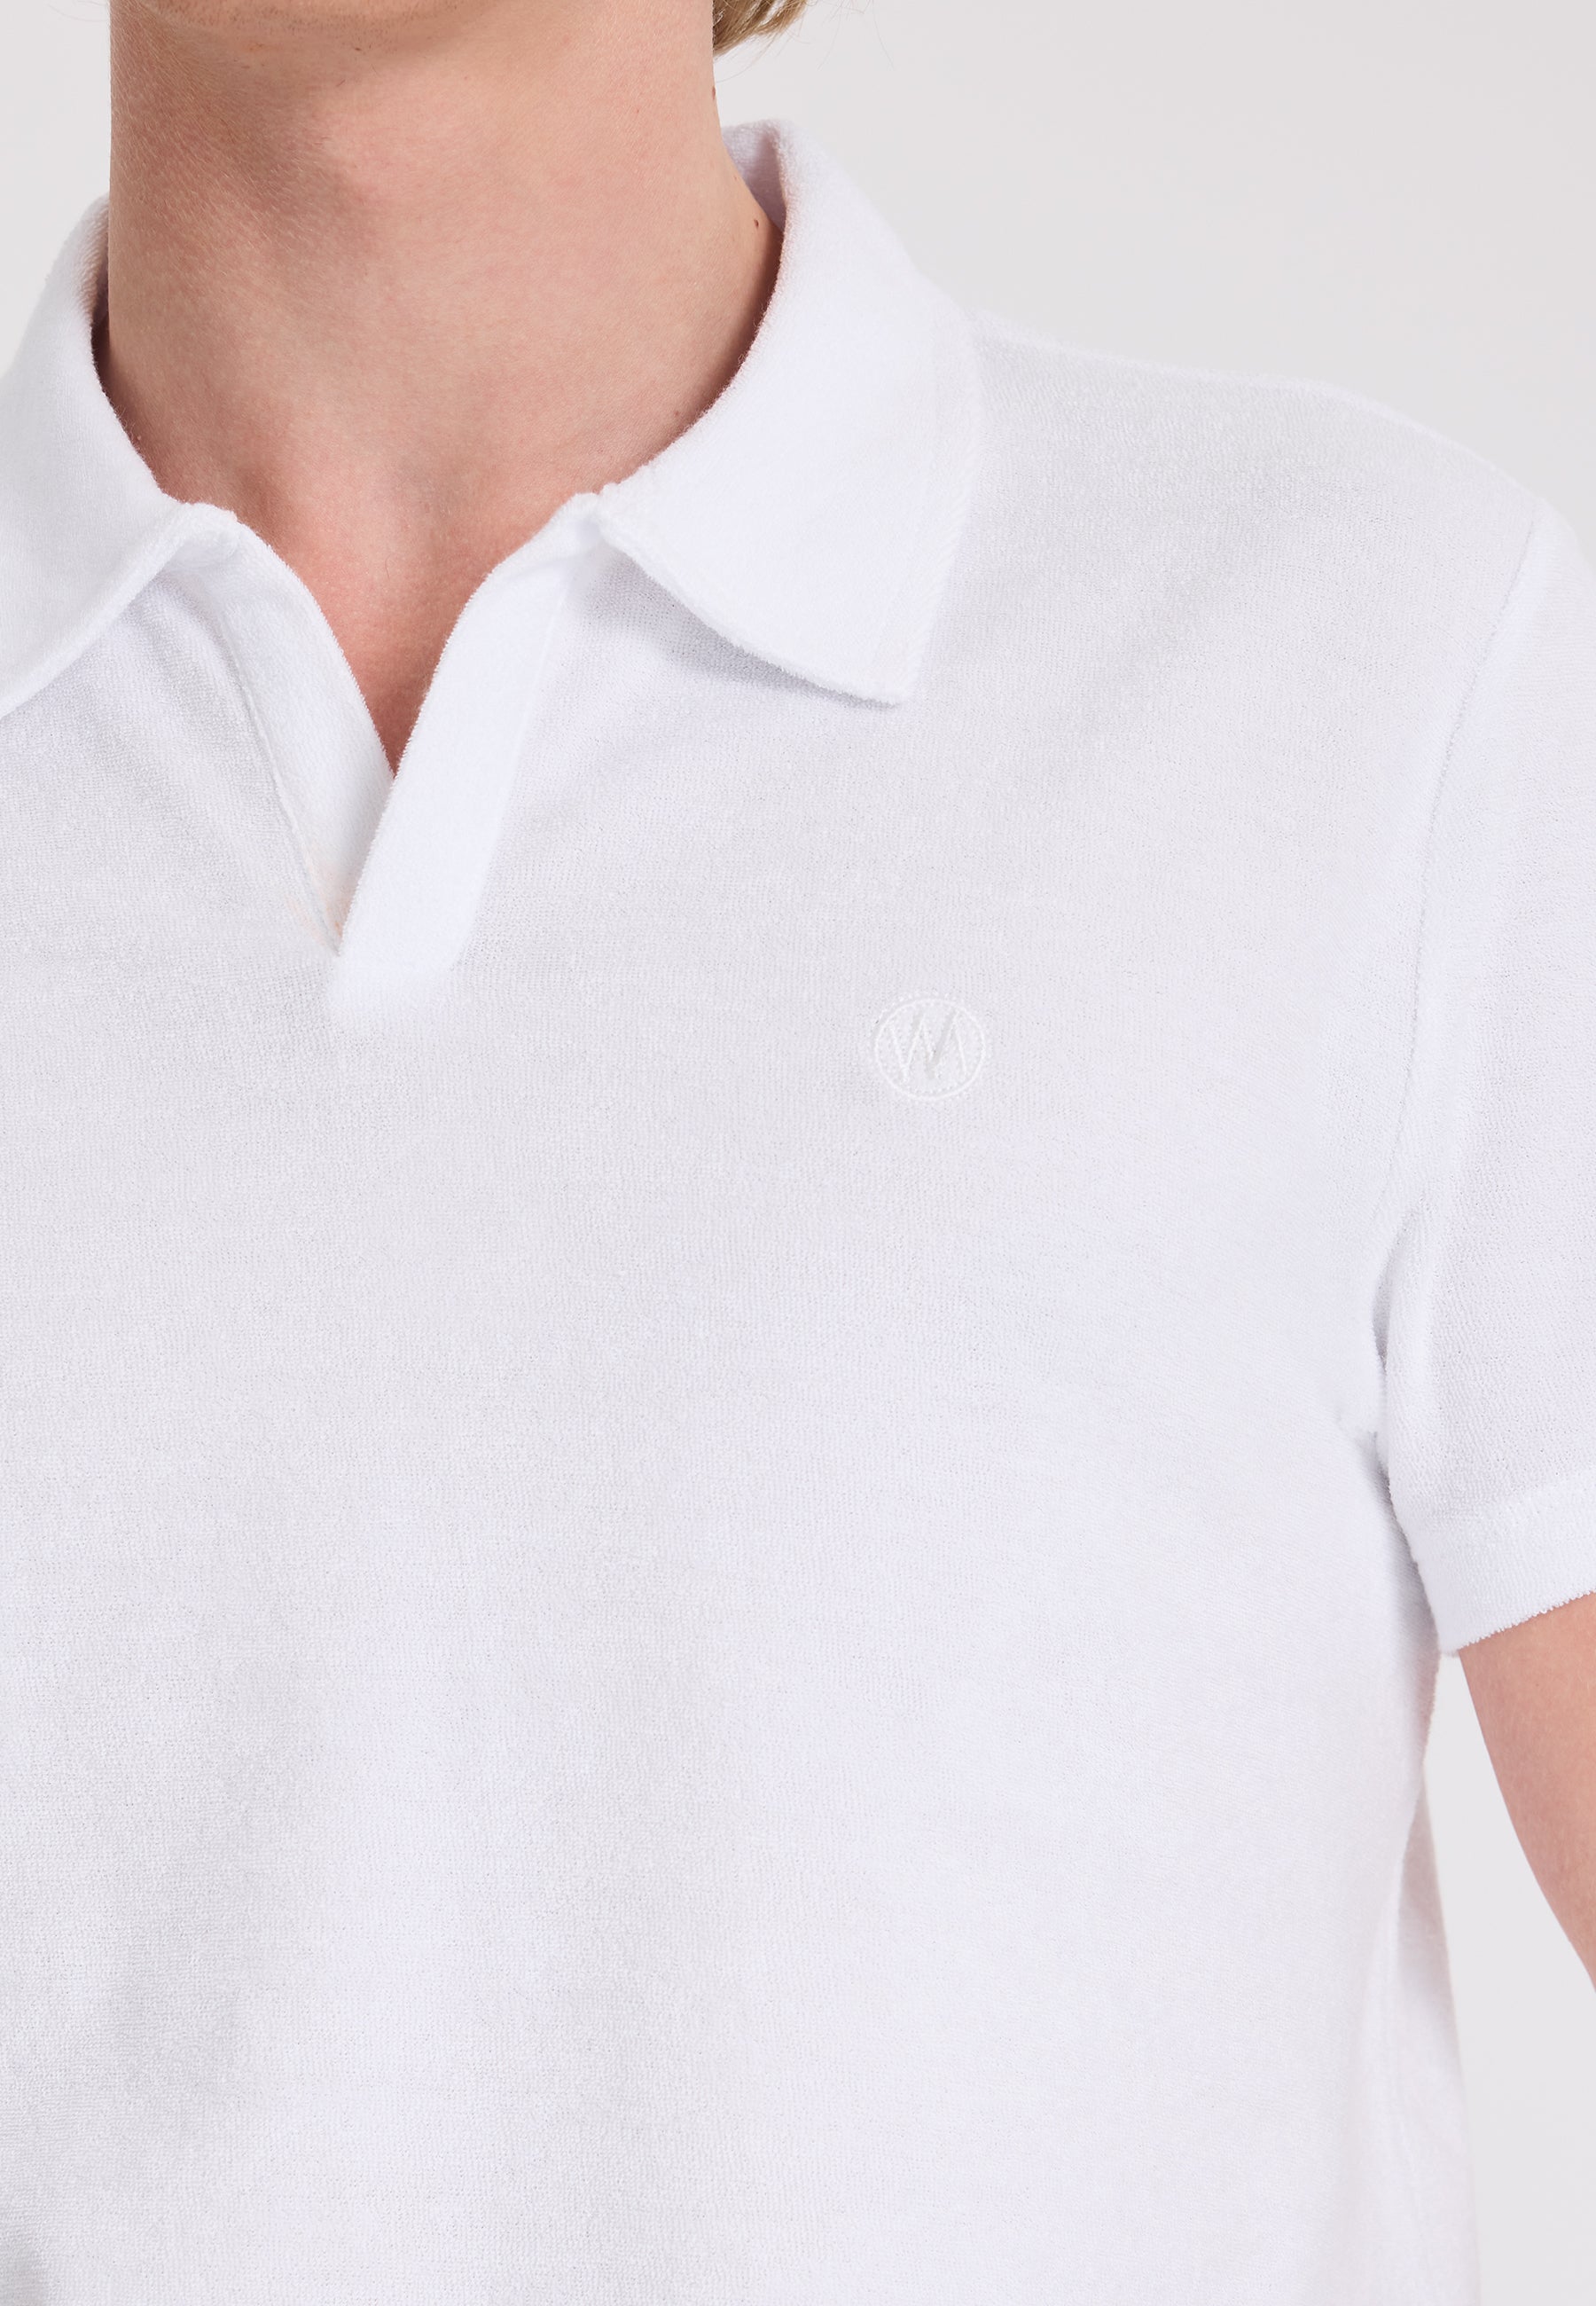 BREEZE TOWELLING POLO SHIRT in Solid White